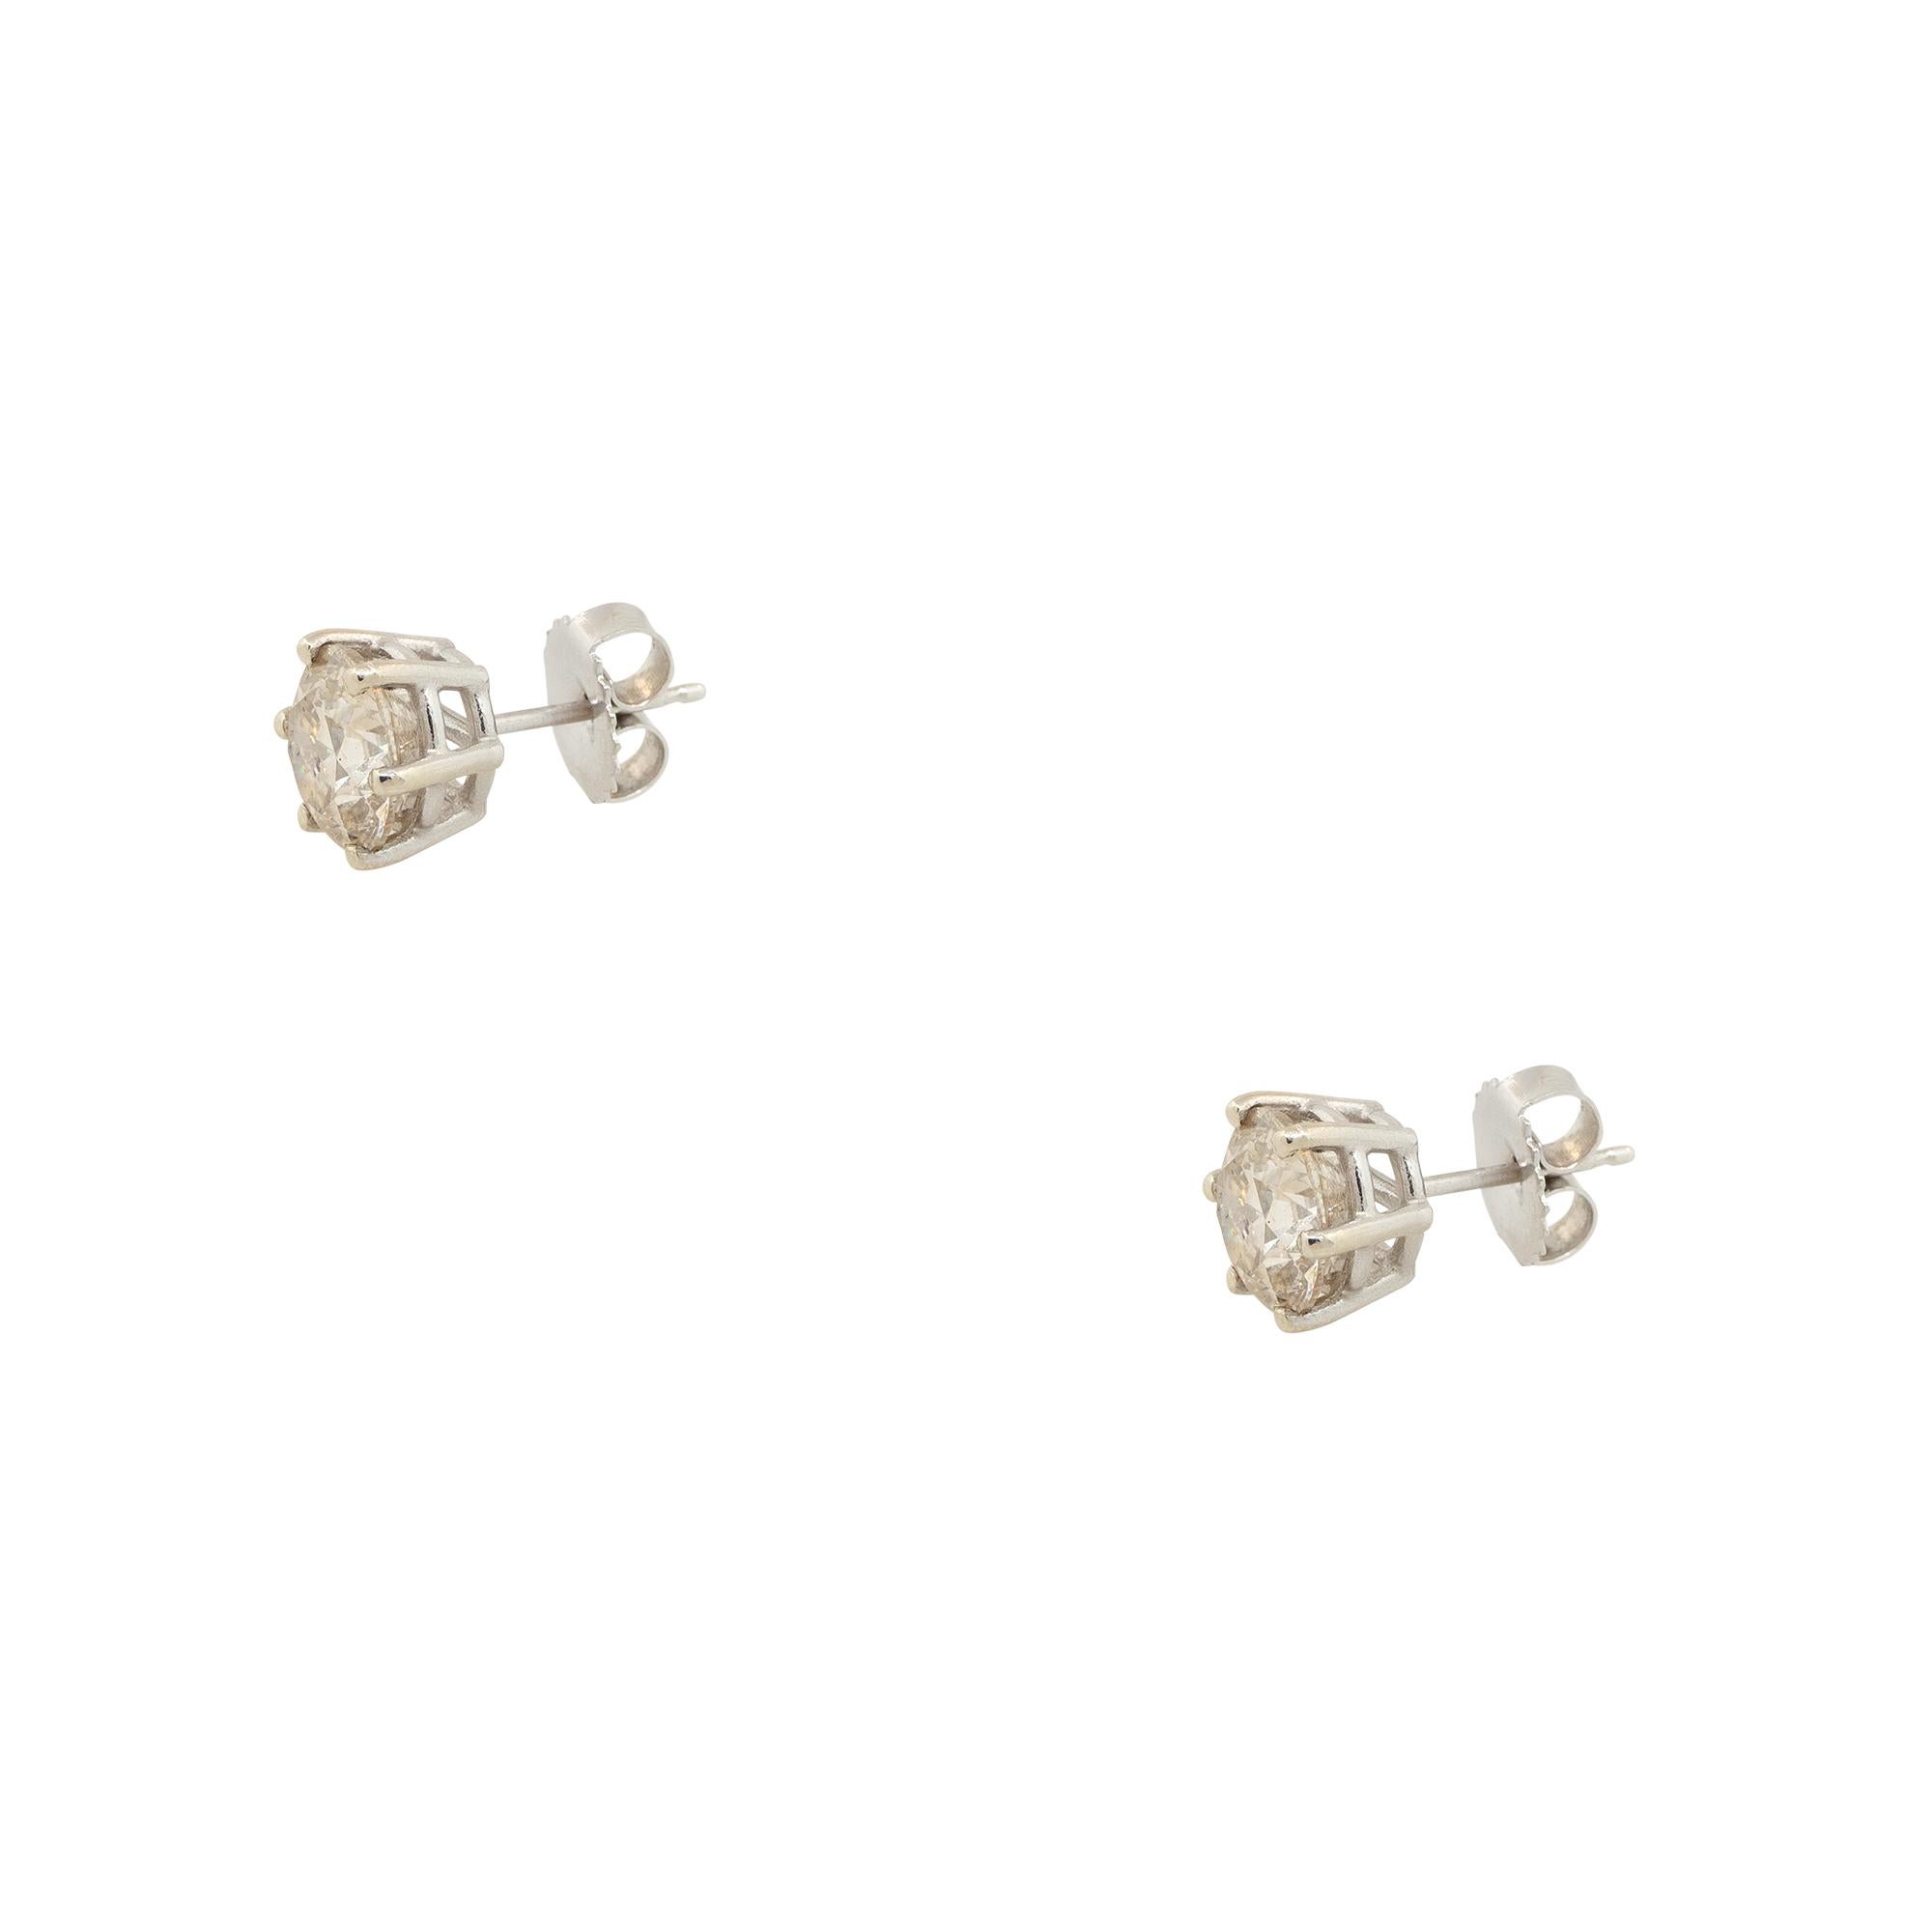 Material: 14k White Gold
Diamond Details: Approx. 3.37ctw of round cut Diamonds. Diamonds are L/M in color and SI3 in clarity
Total Weight: Unknown
Earring Backs: Friction Backs
Additional Details: This item comes with a presentation box!
SKU: G10007